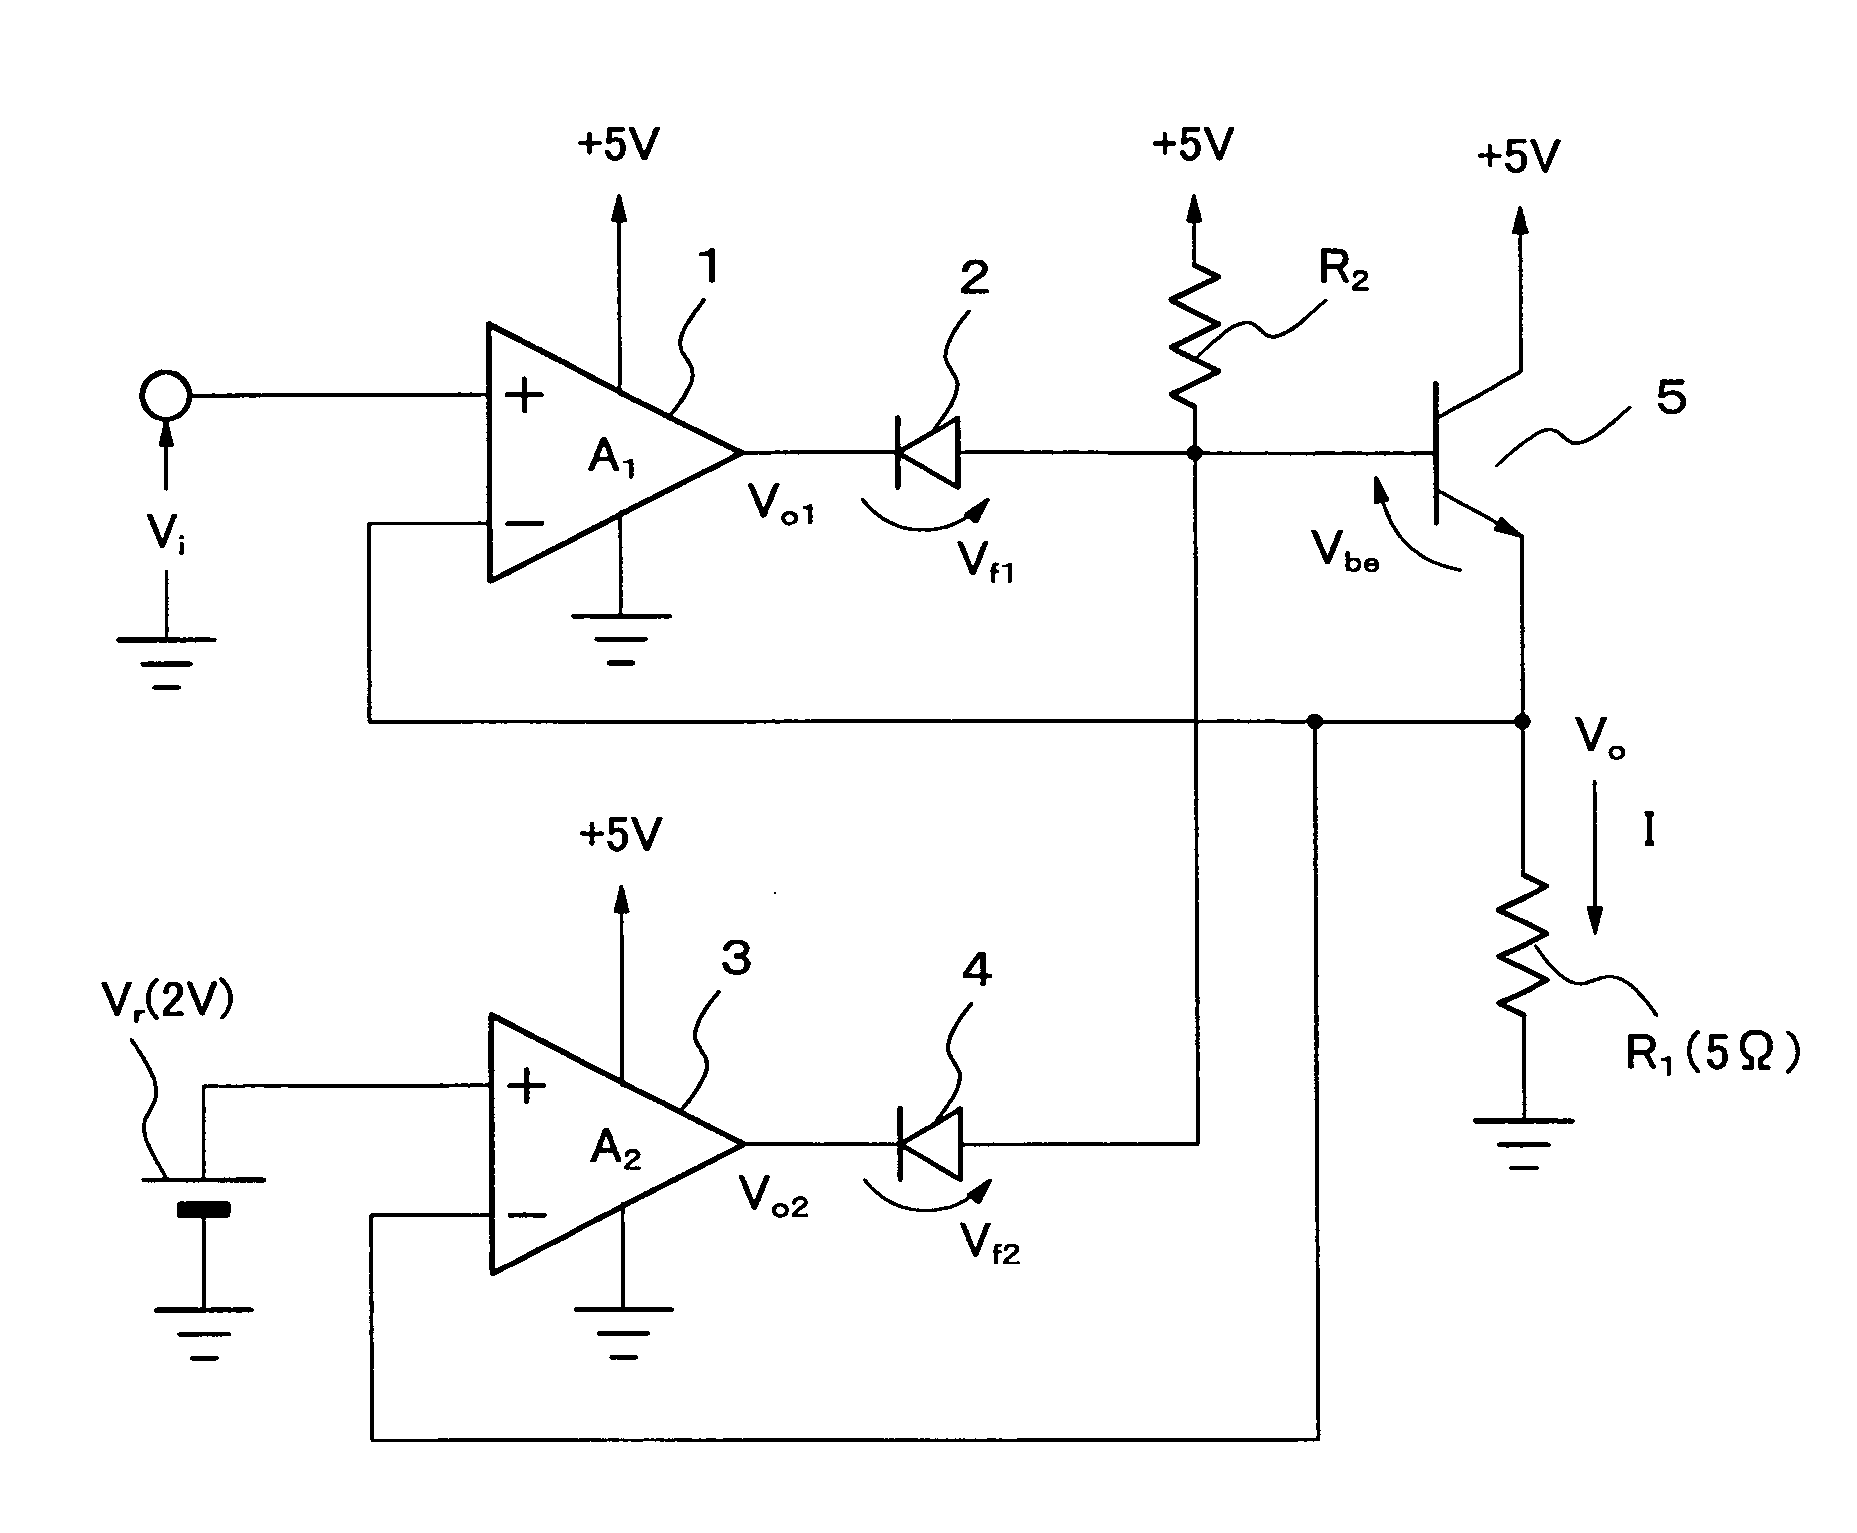 Current control circuit with limiter, temperature control circuit, and brightness control circuit